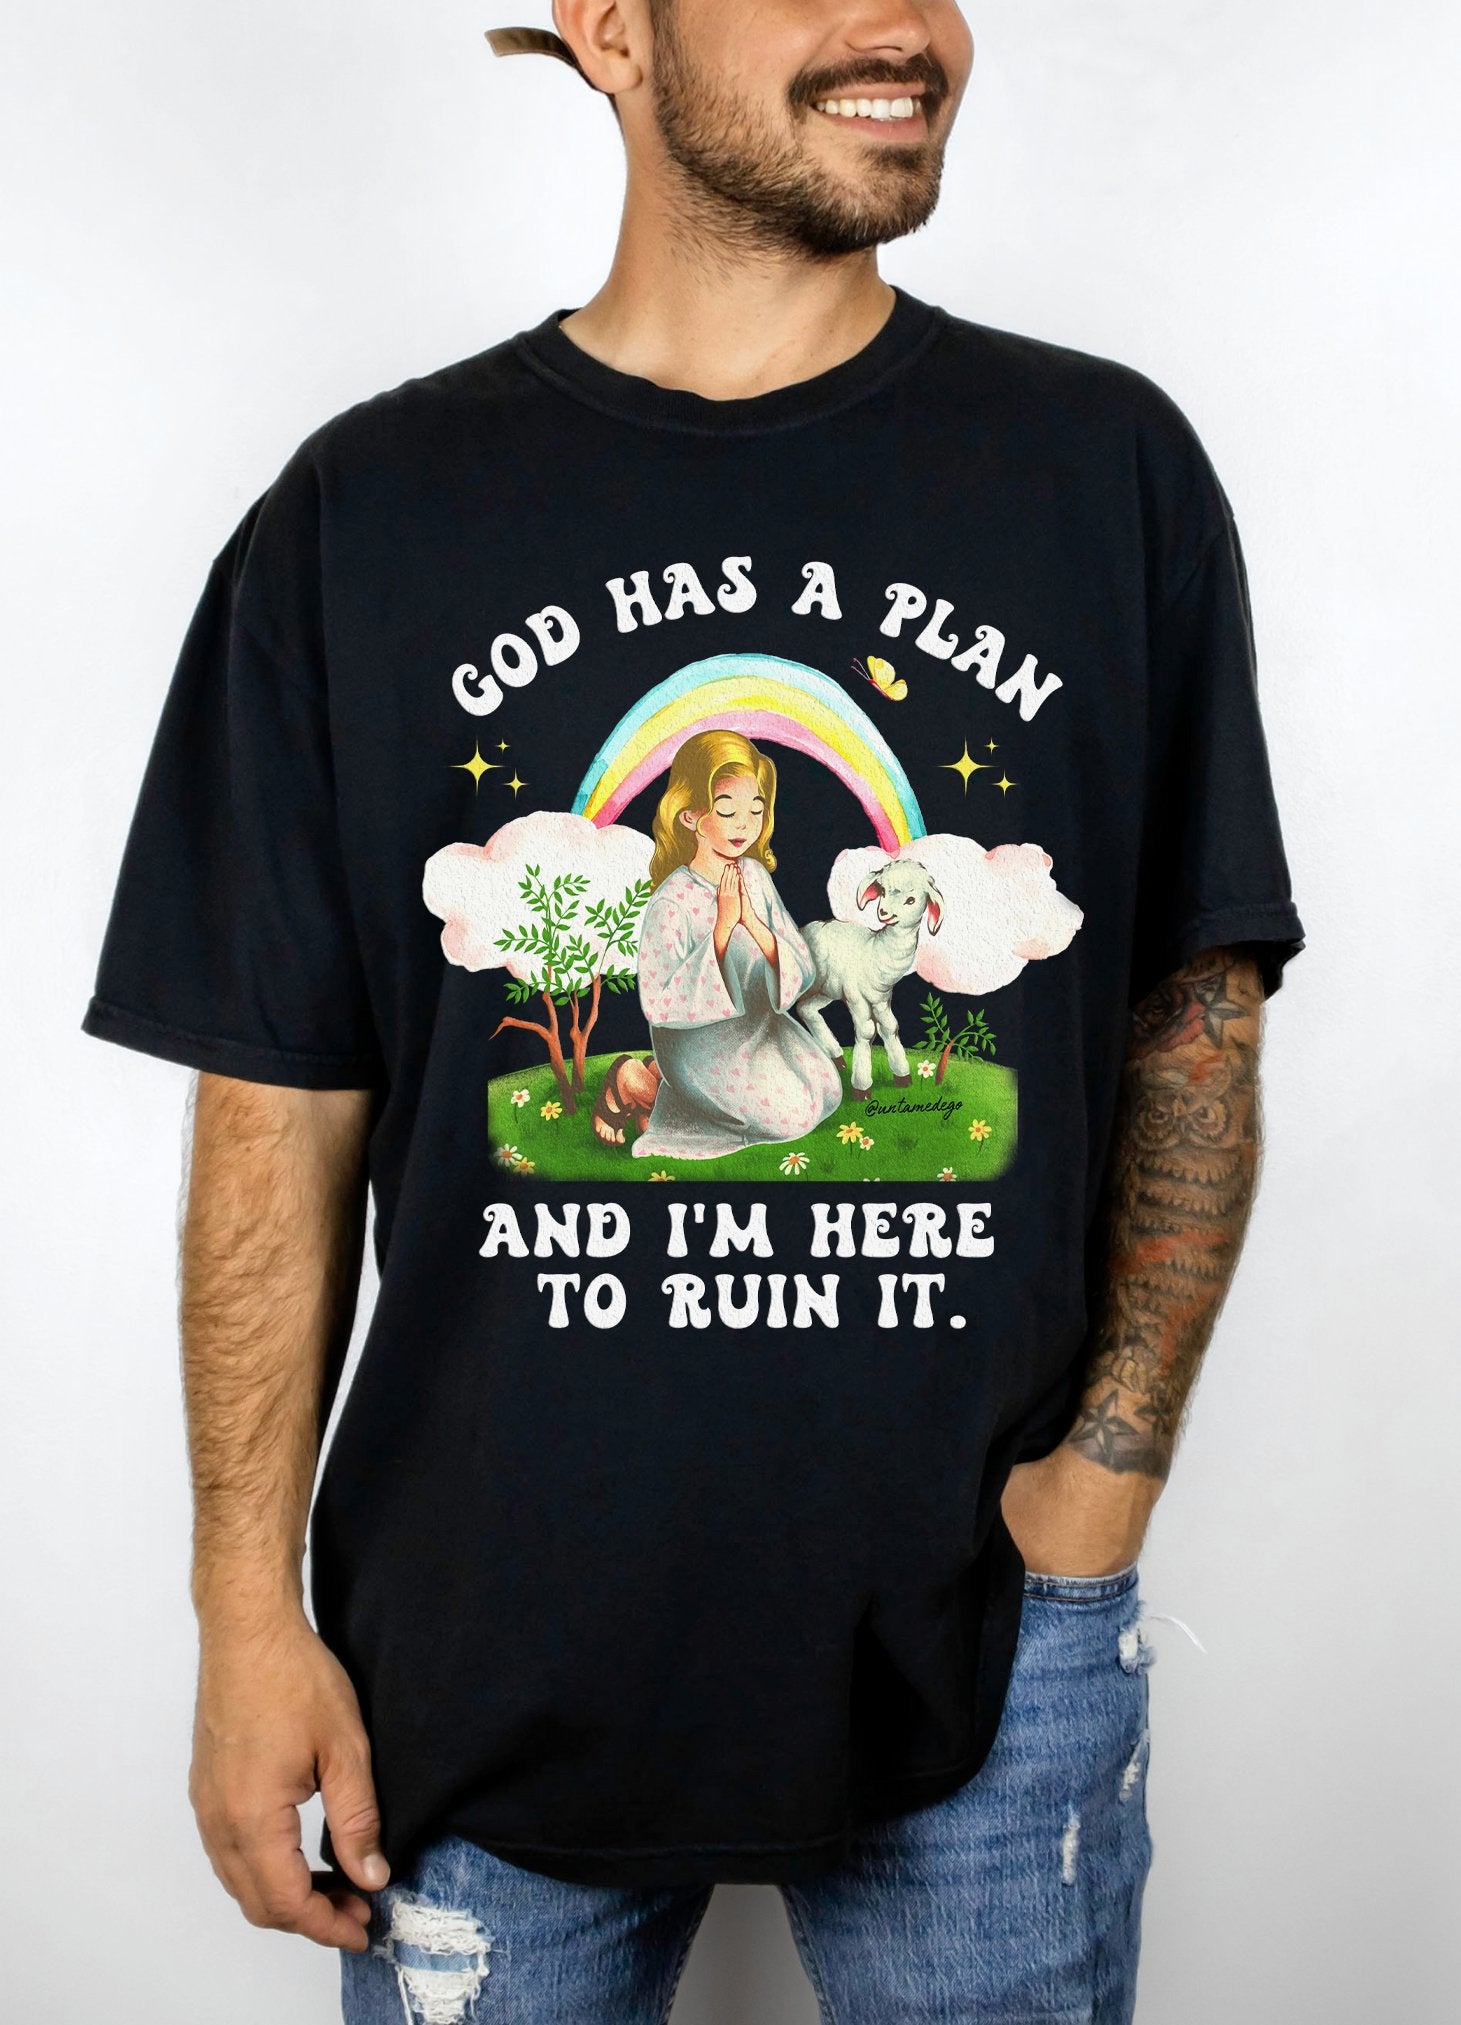 God Has A Plan And I'm Here To Ruin It Mens Tee - UntamedEgo LLC.